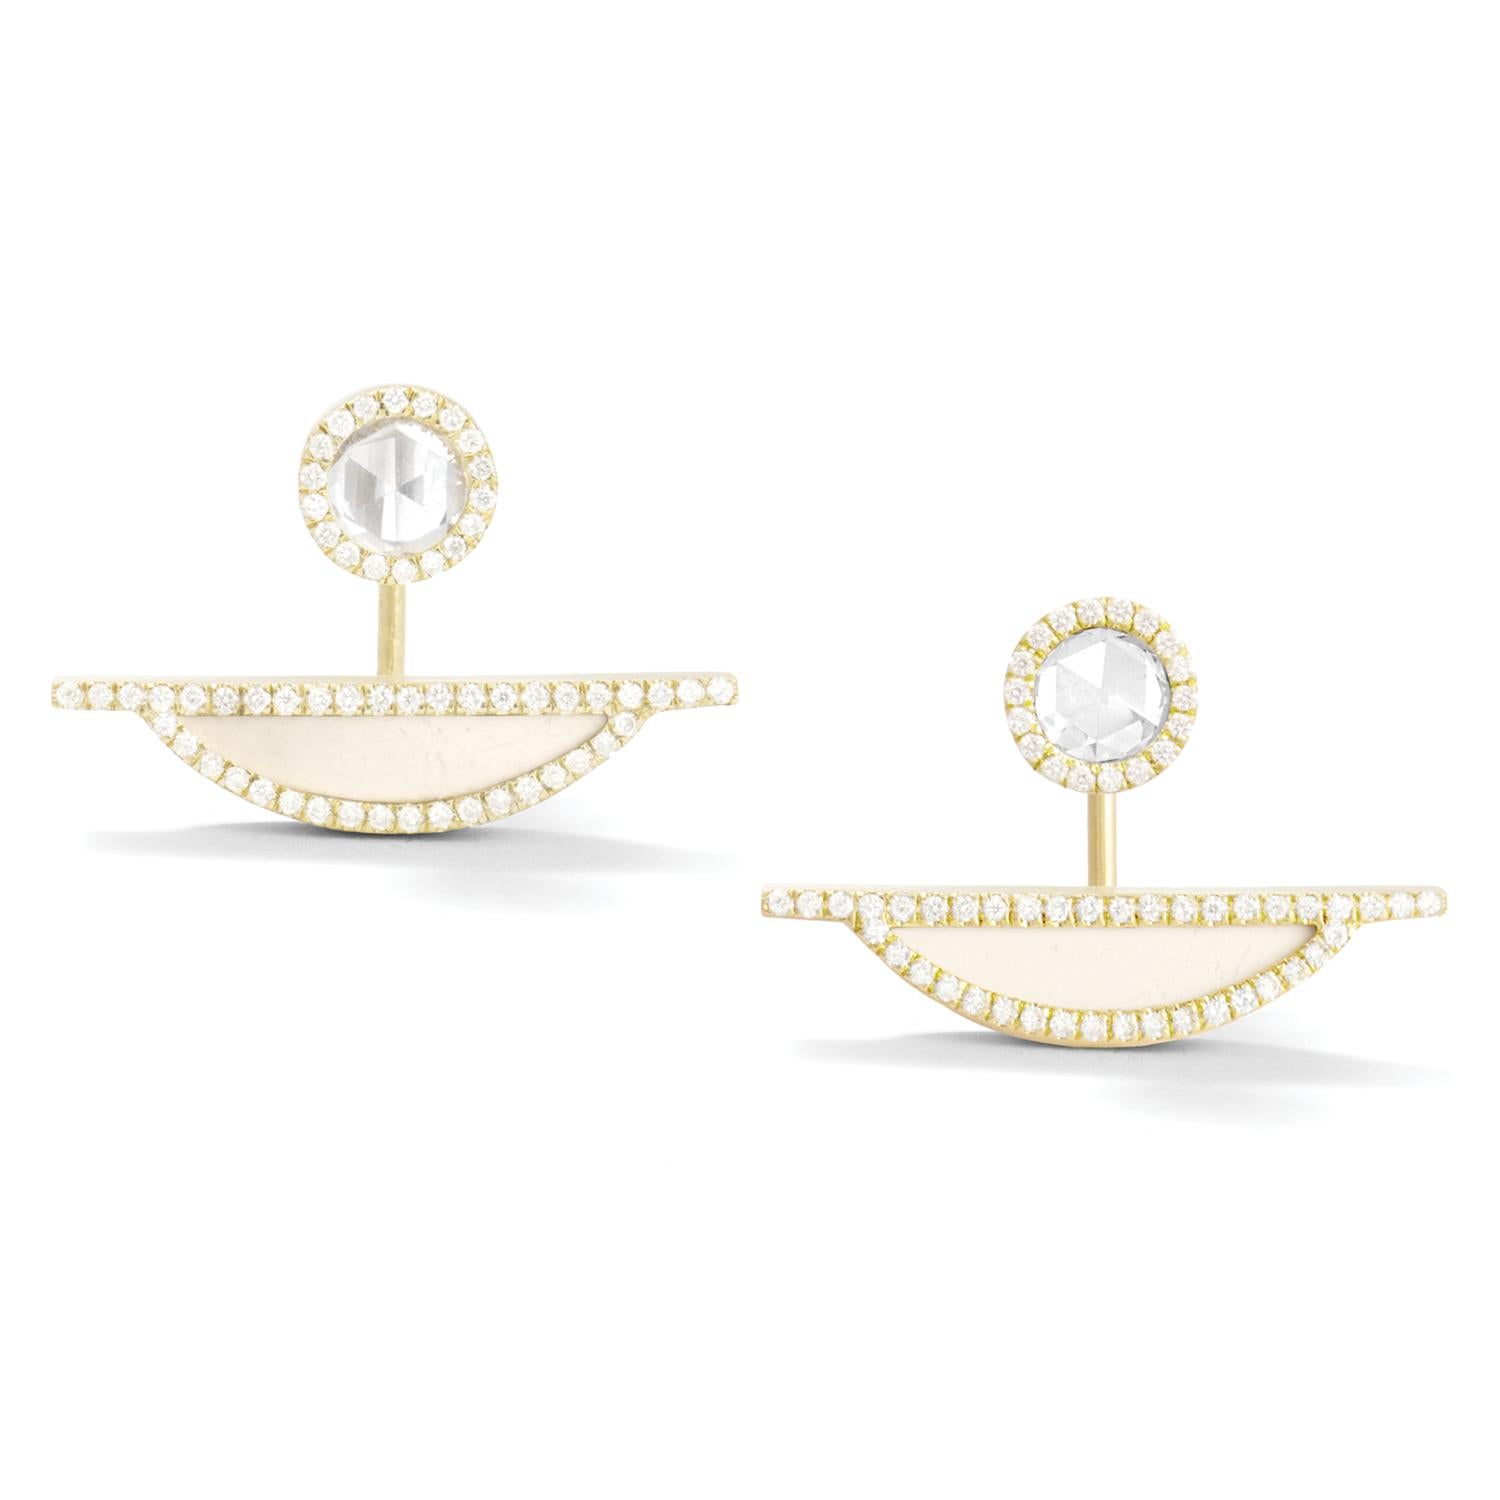 1.00 carat white rose cut diamond and ivory jasper earrings with white diamond pavé, front-back, 18 carat recycled yellow gold, 1.21 TCW  - One-of-a-kind

Ivory jasper crescents are illuminated by white rose-cut diamonds in this pair of earrings,